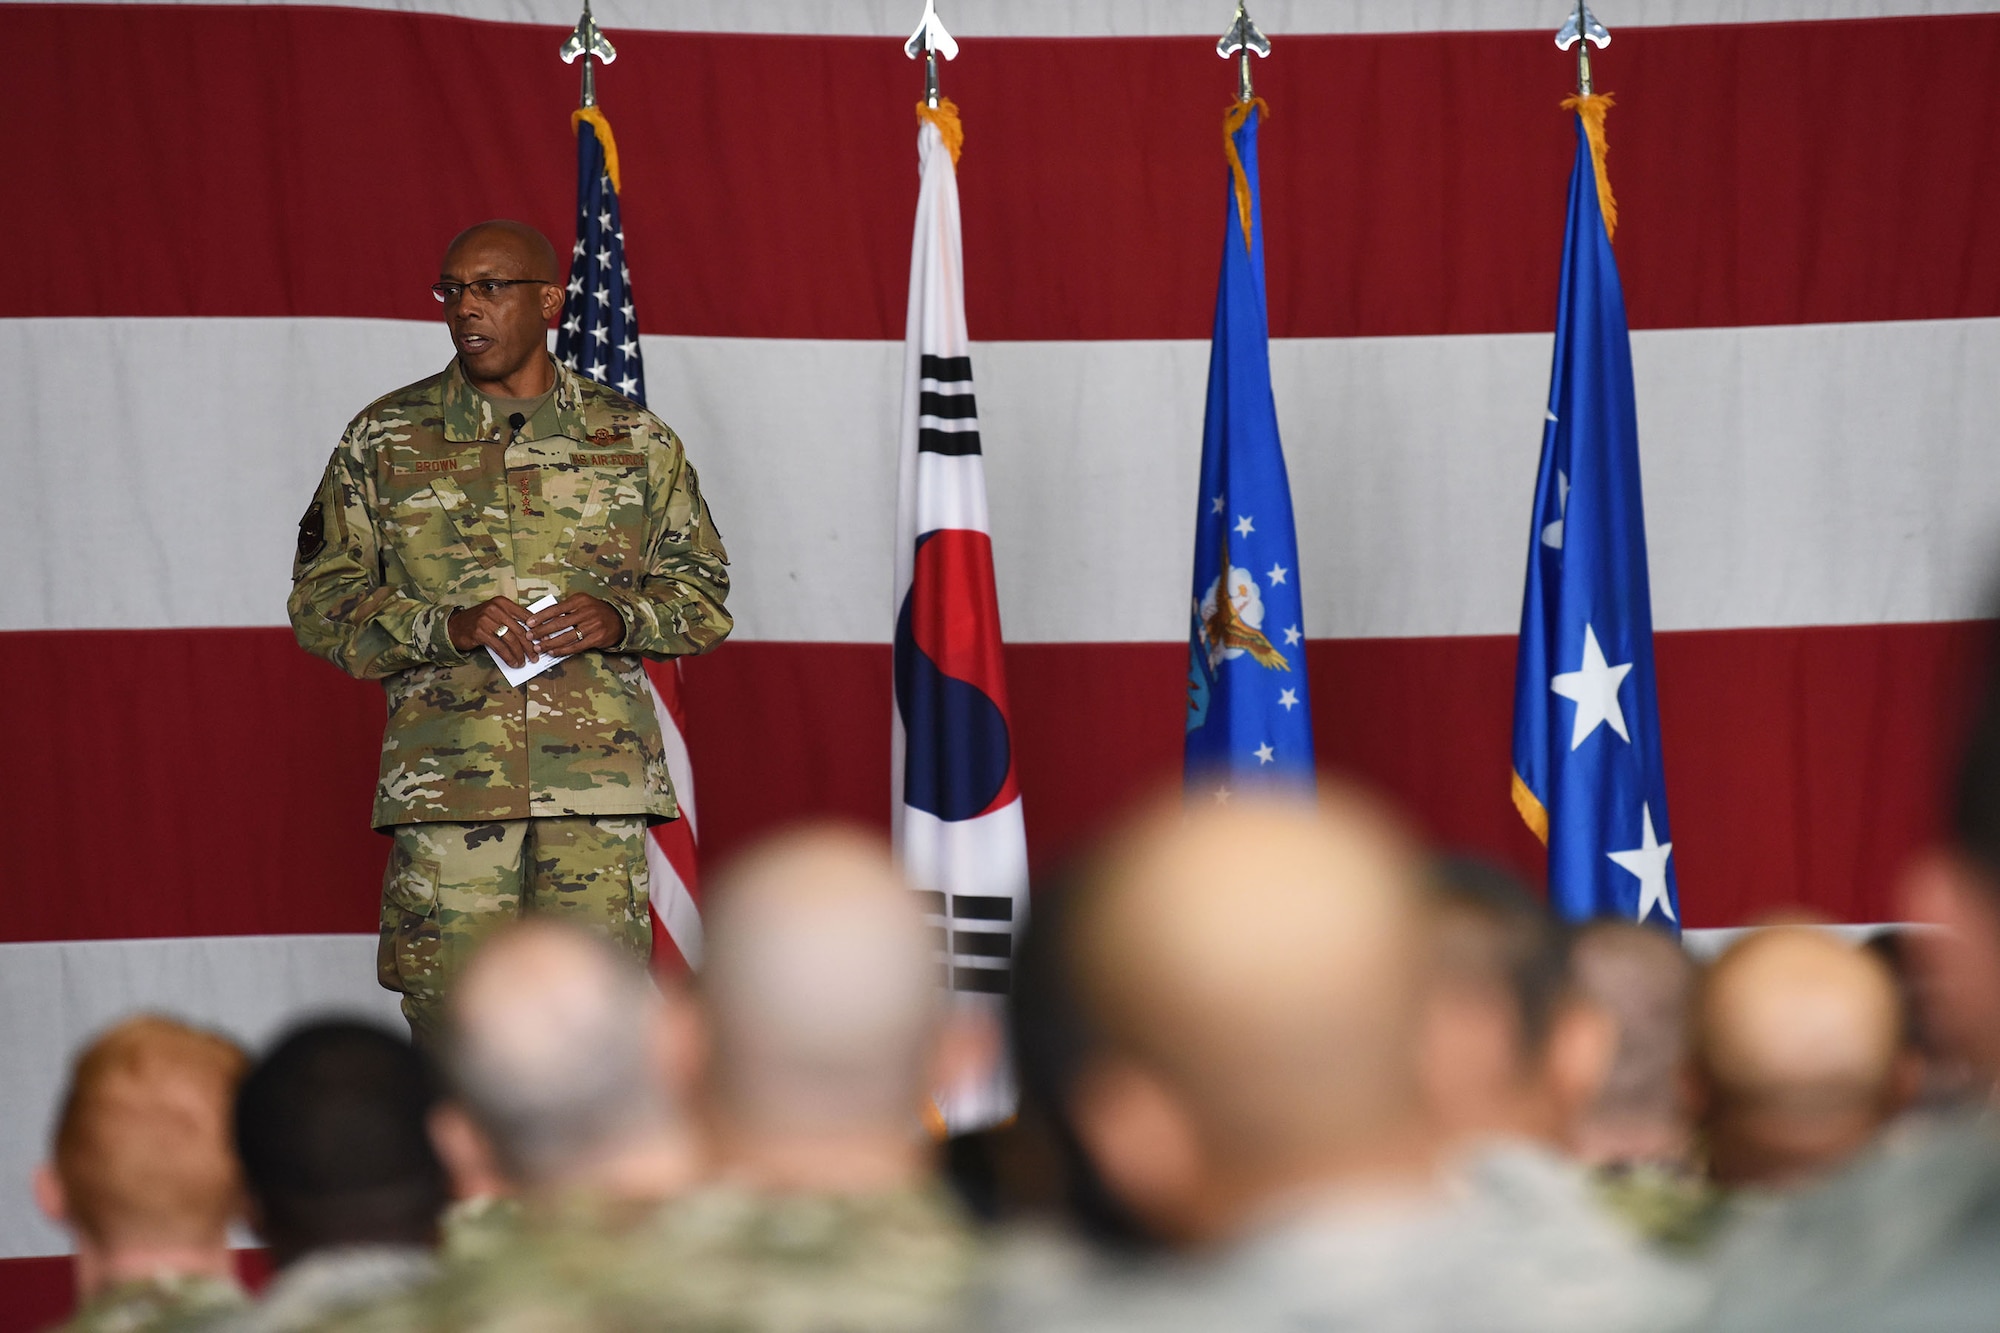 Gen. CQ Brown, Jr., Pacific Air Forces commander, details his priorities to the men and women of Team Osan during an all call at Osan Air Base, Republic of Korea, Oct. 17, 2019. While gaining an in-depth exposure of the installation’s unique mission, Brown used the visit as an opportunity to explain PACAF’s priorities and how vital Team Osan is in contributing to the Indo-Pacific region’s security and stability. (U.S. Air Force photo by Staff Sgt. Benjamin Bugenig)